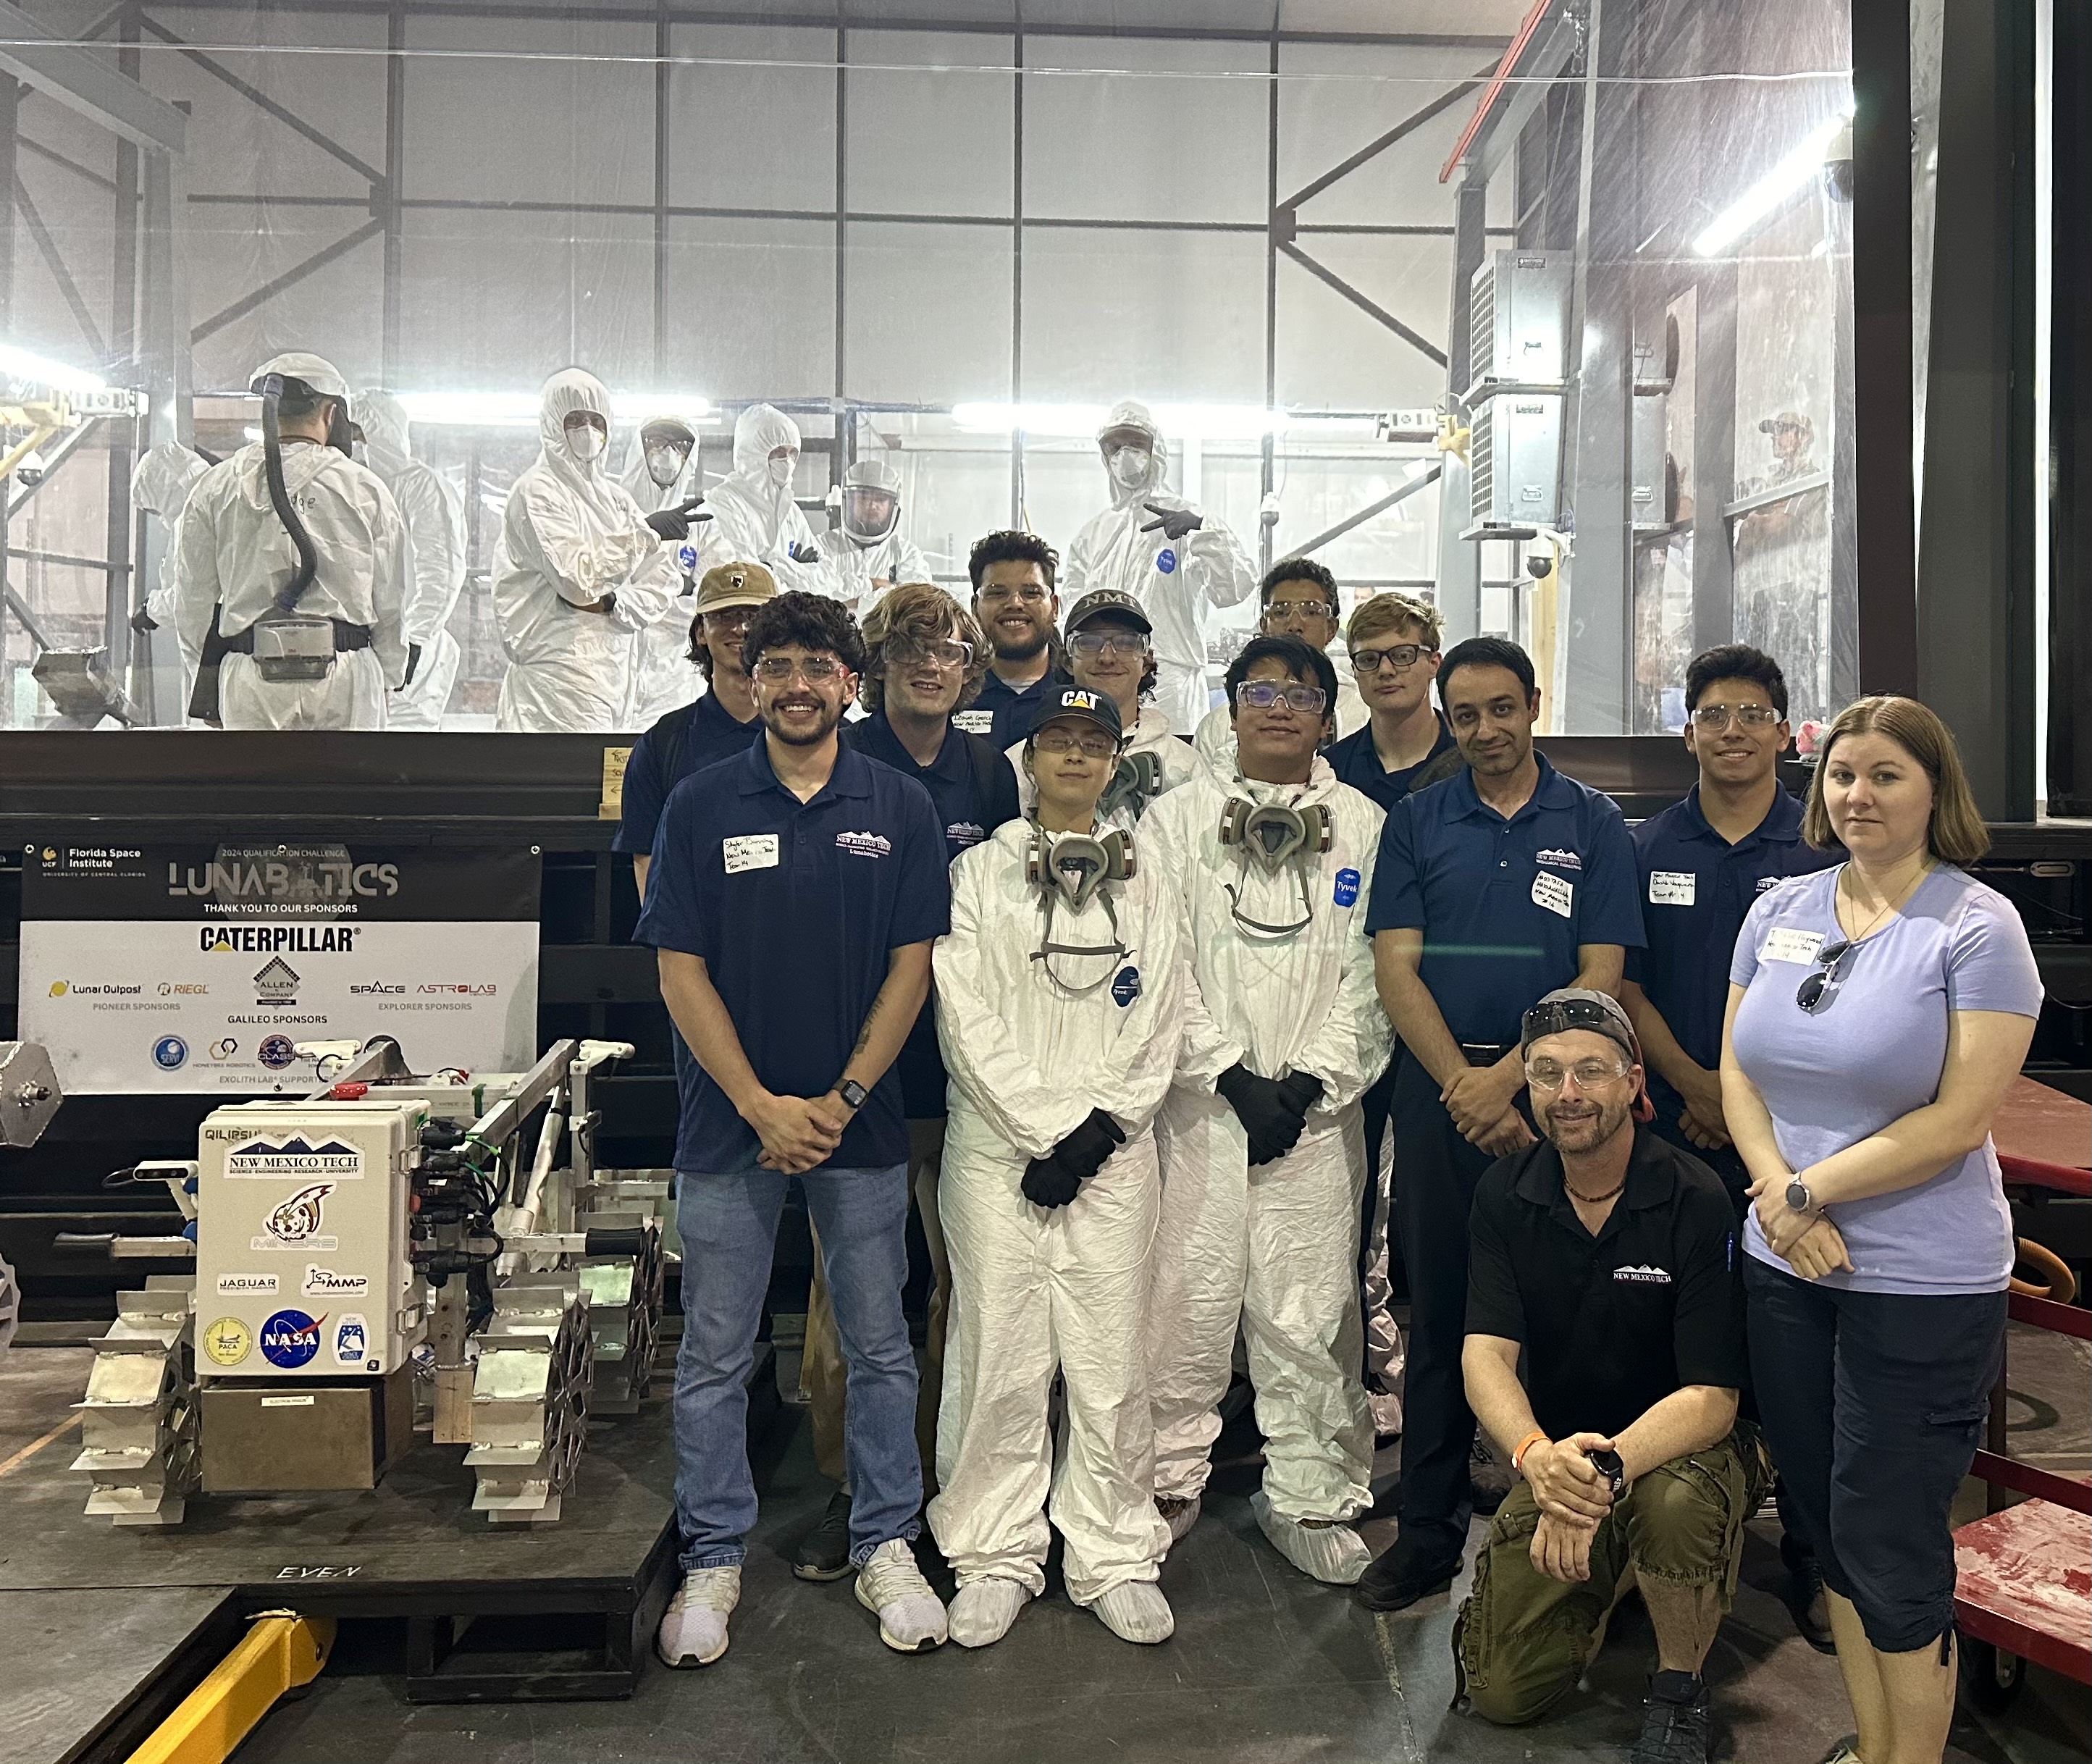 The NMT Team and lunar robot before one of the challenge runs. Robot operators in the pit wear protective clothing and respiratory gear as the simulated moon dust is irritating to skin and lungs.